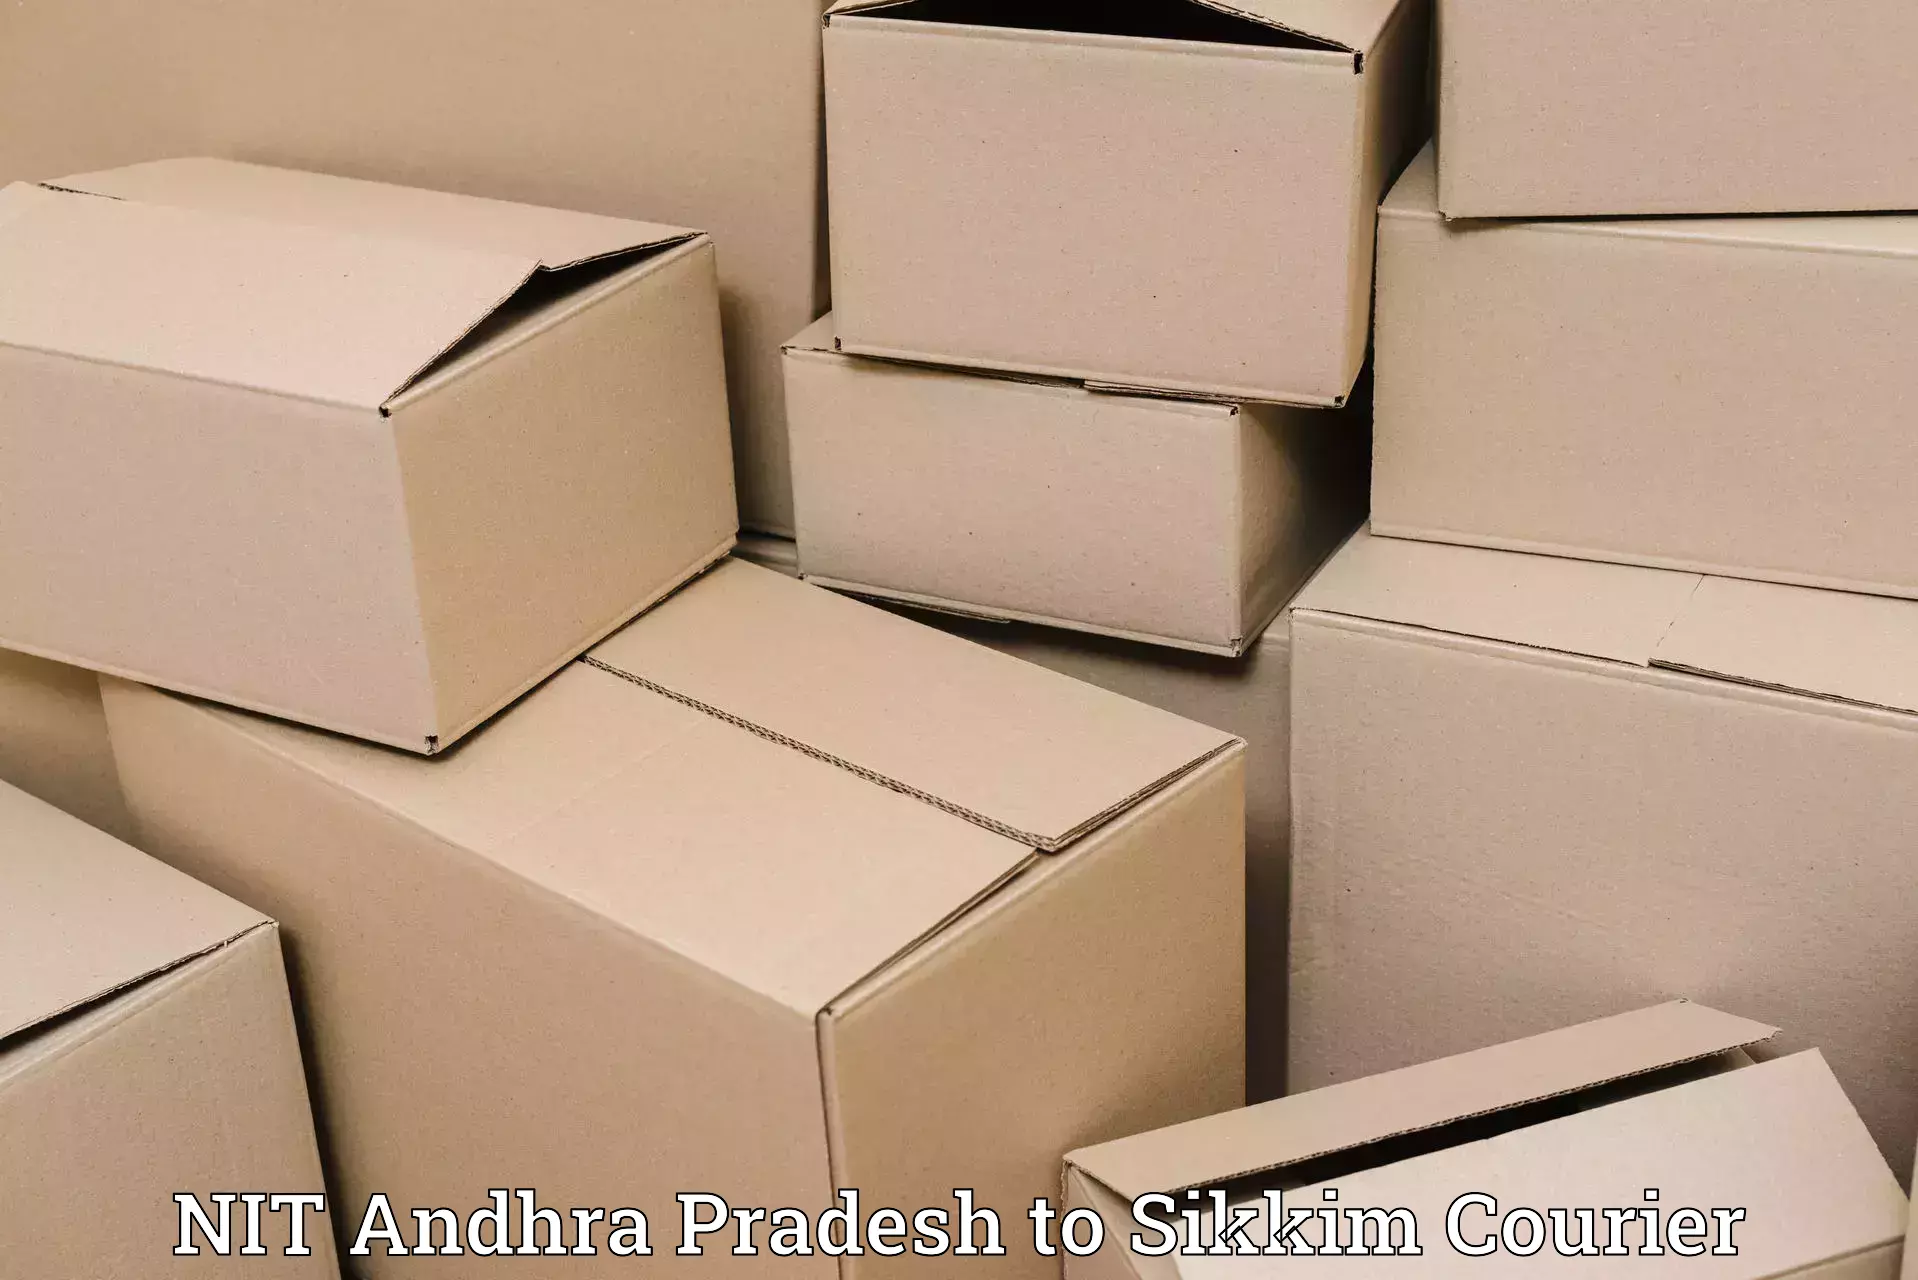 24-hour courier services NIT Andhra Pradesh to Rangpo